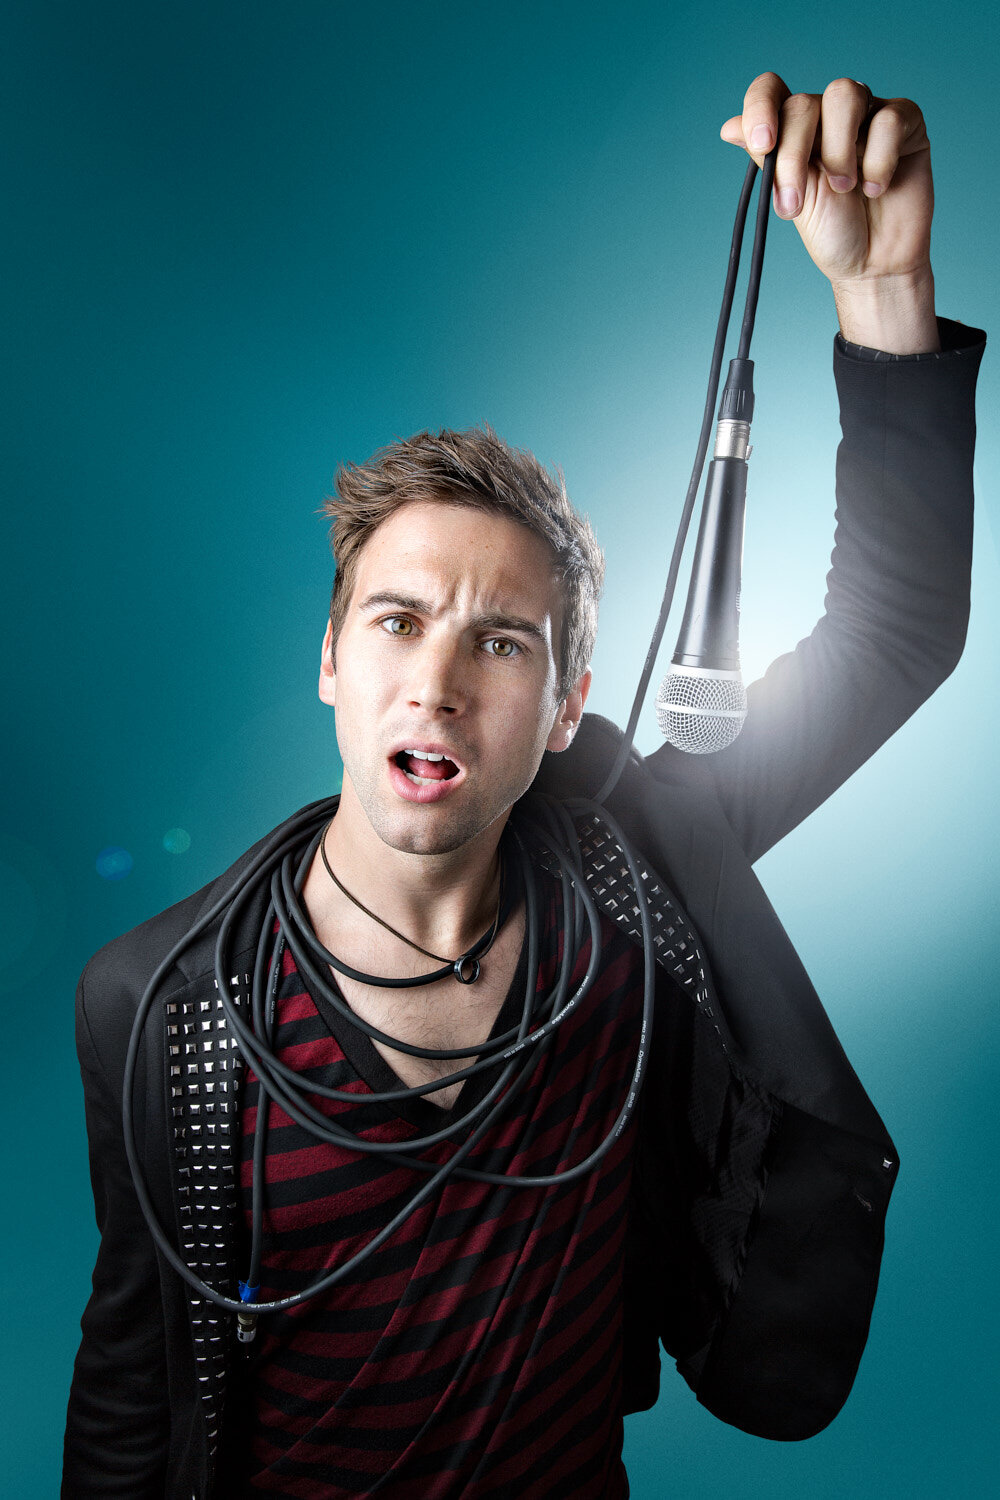 promo photo of juggler Marcus Monroe holding microphone with cord wrapped around his neck by studio portrait photographer Hanna Agar